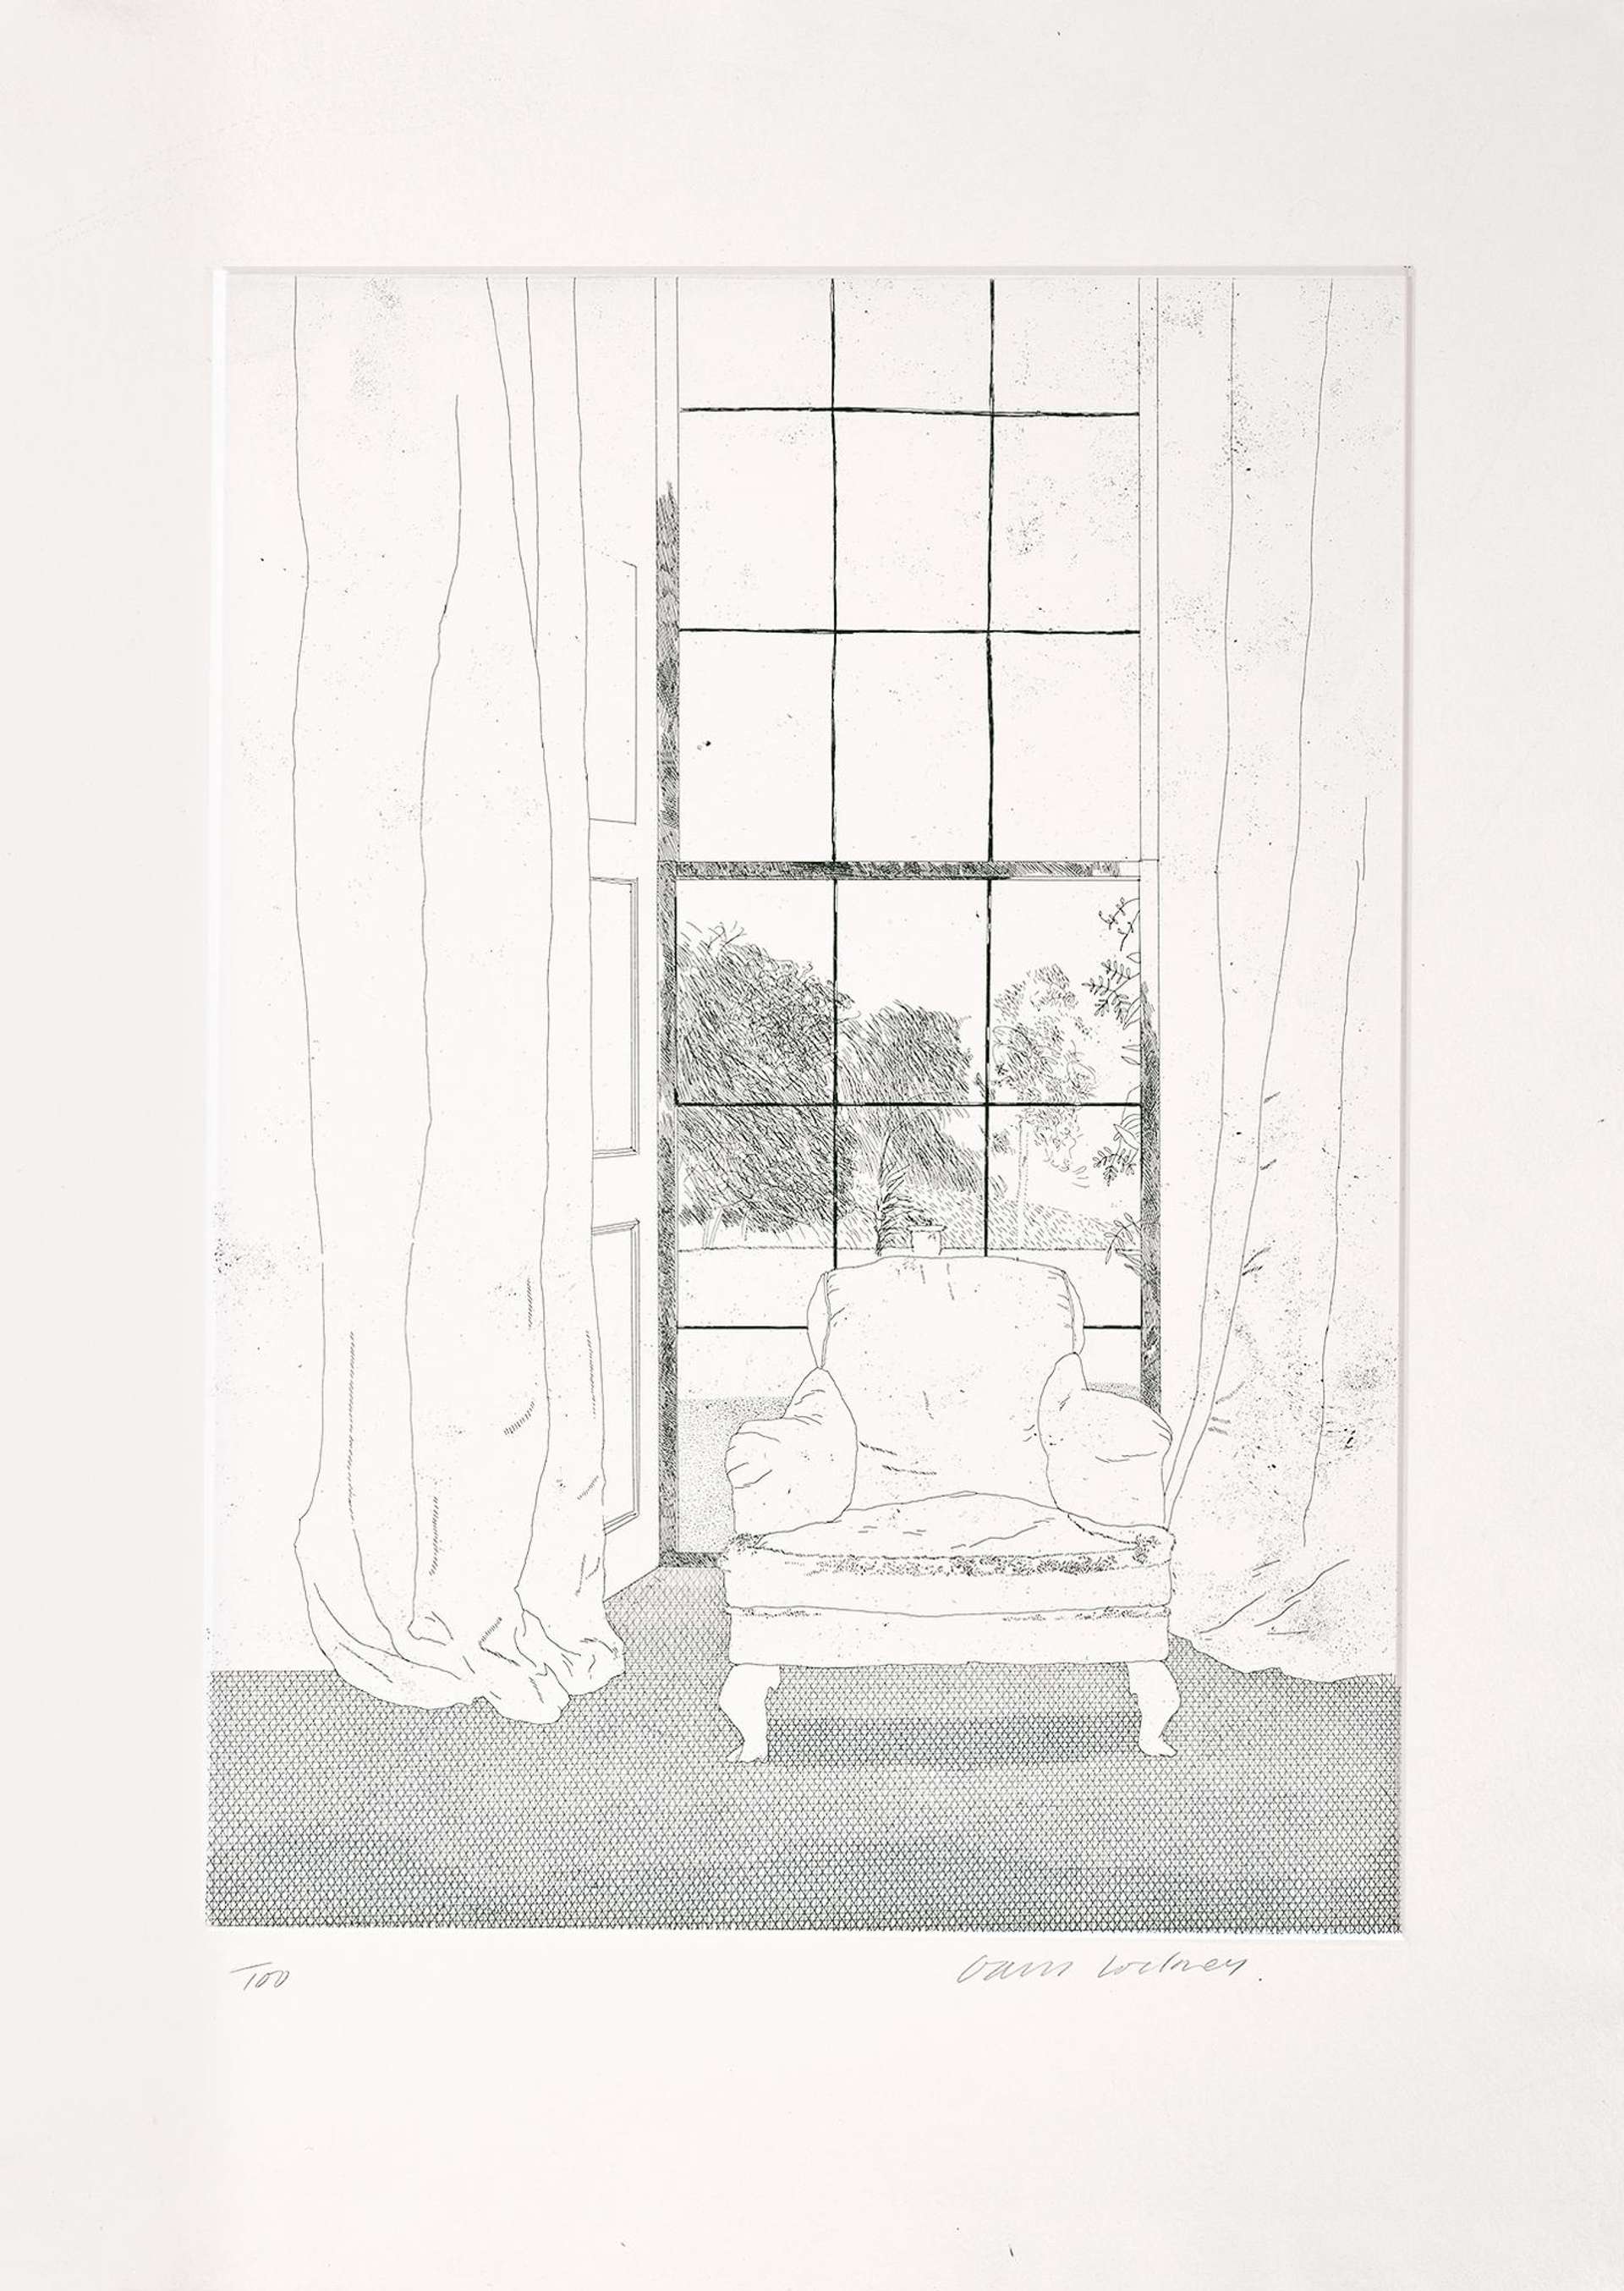 David Hockney’s Home. A black and white etching of a cushioned chair in front of a window with drapes drawn beside it.